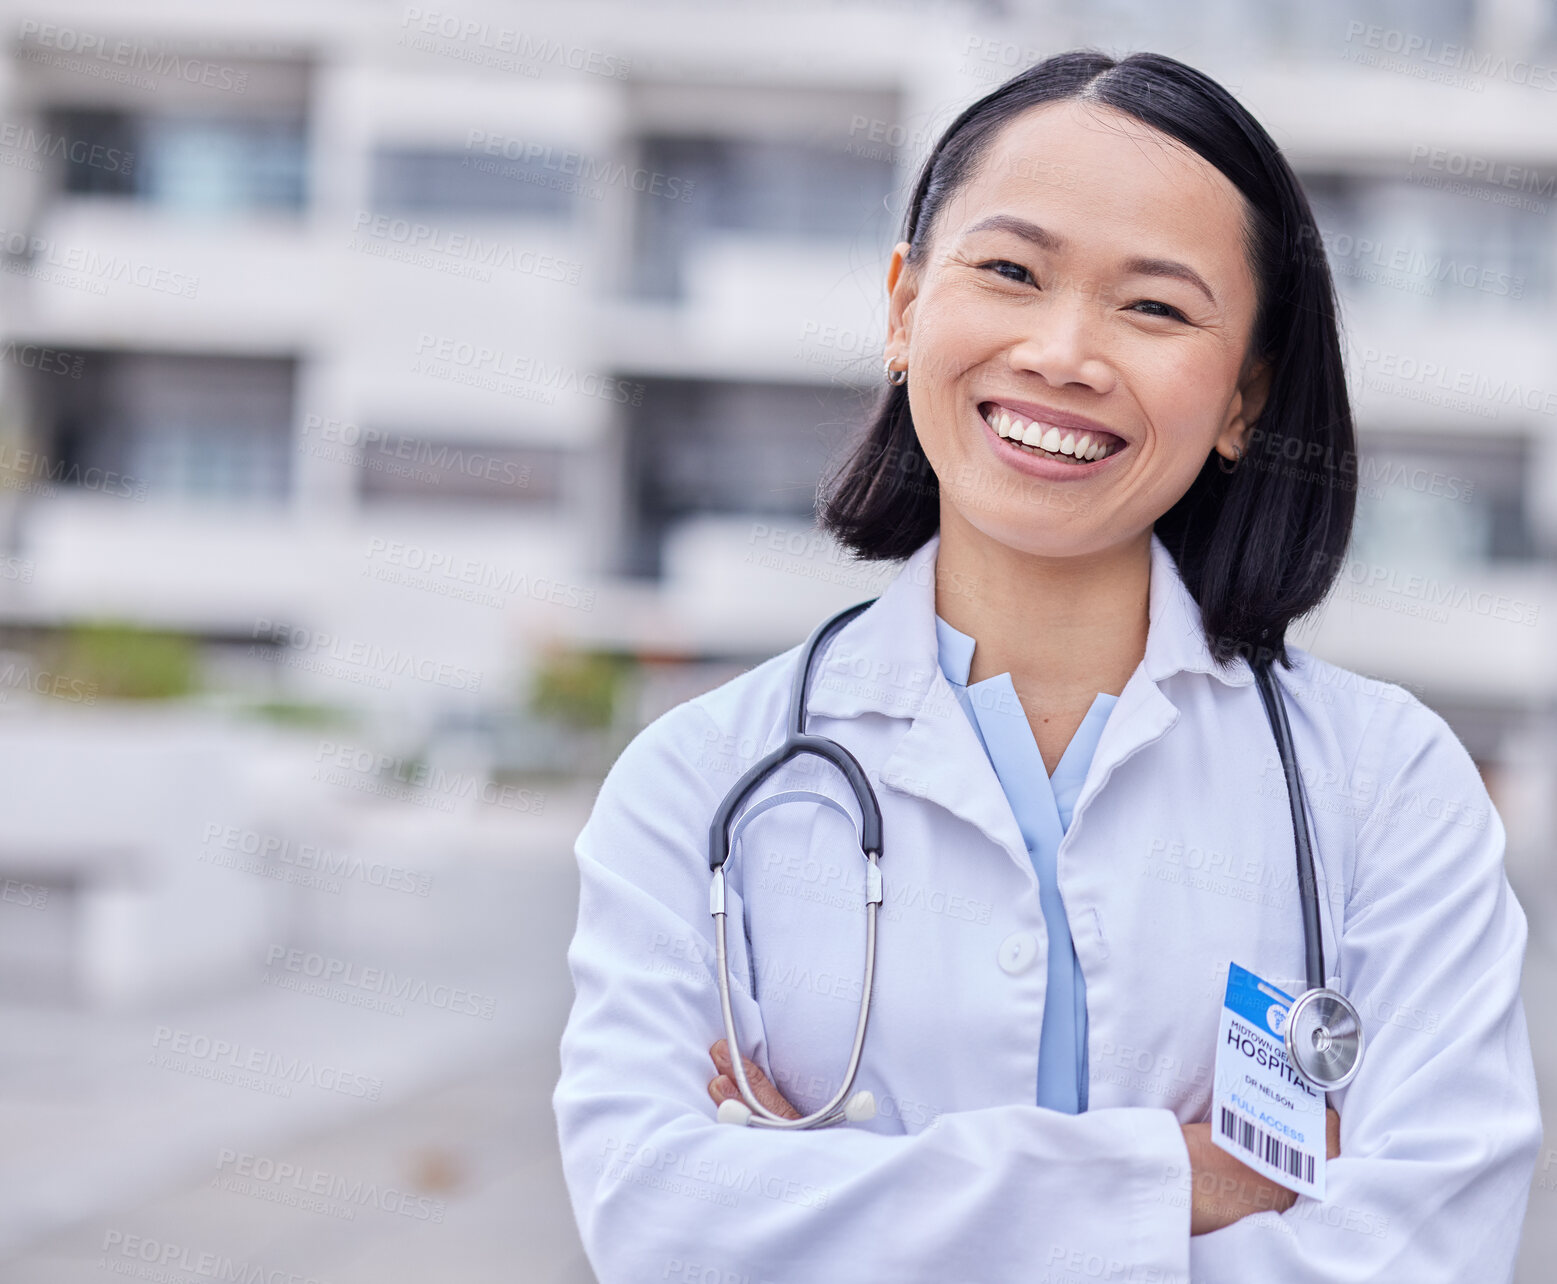 Buy stock photo Leadership, happy and portrait of a doctor by hospital with success after surgery or consultation. Happiness, smile and Asian female healthcare worker with confidence standing outdoor medical clinic.